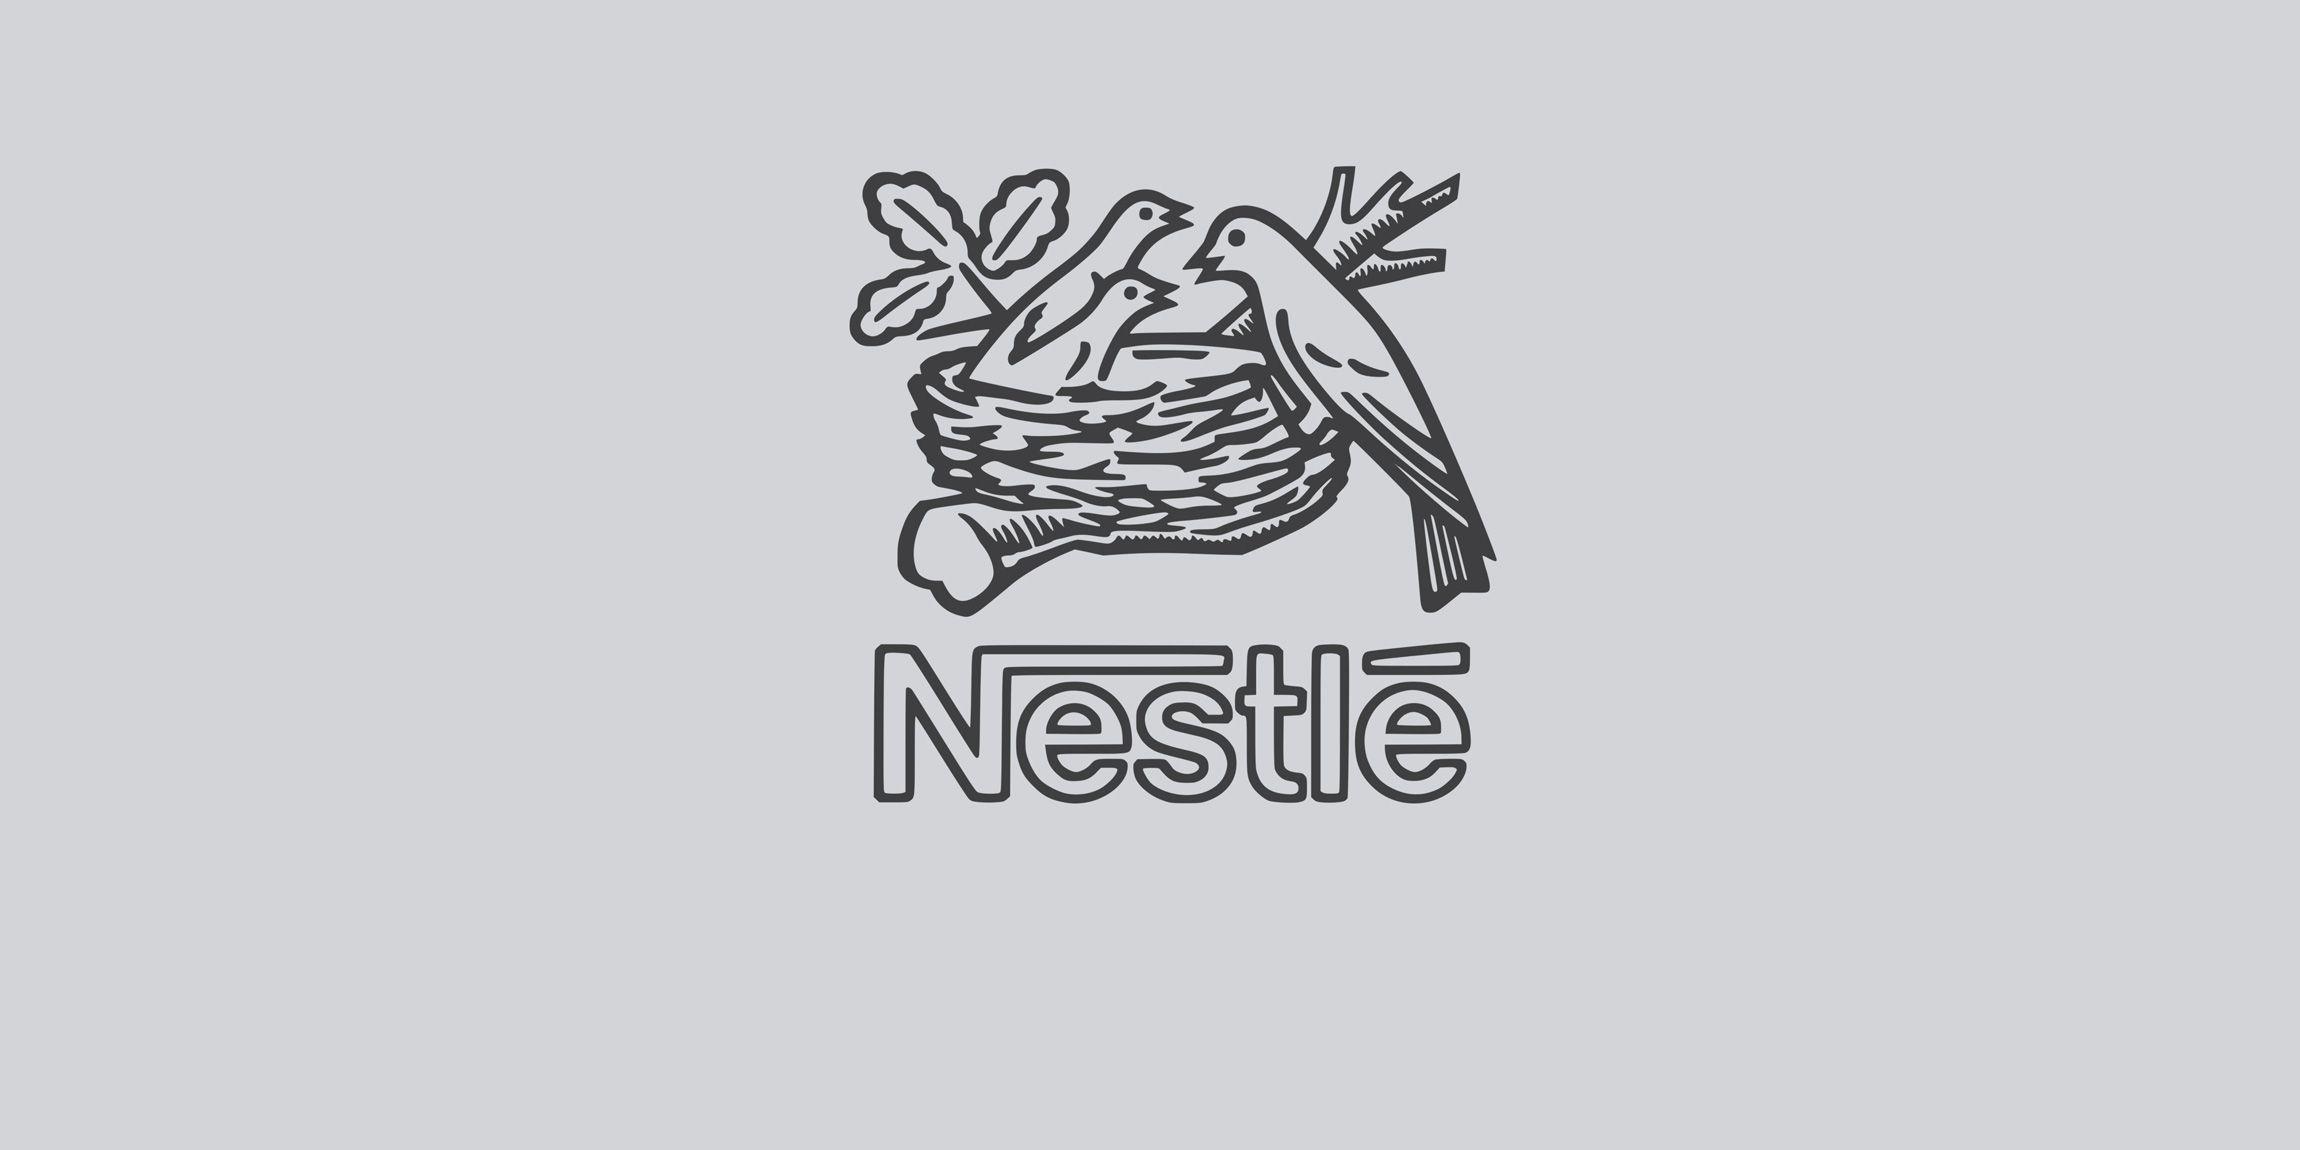 Nestlé Logo - Discover How Nestle is Used Symbolism to Strengthen Their Message